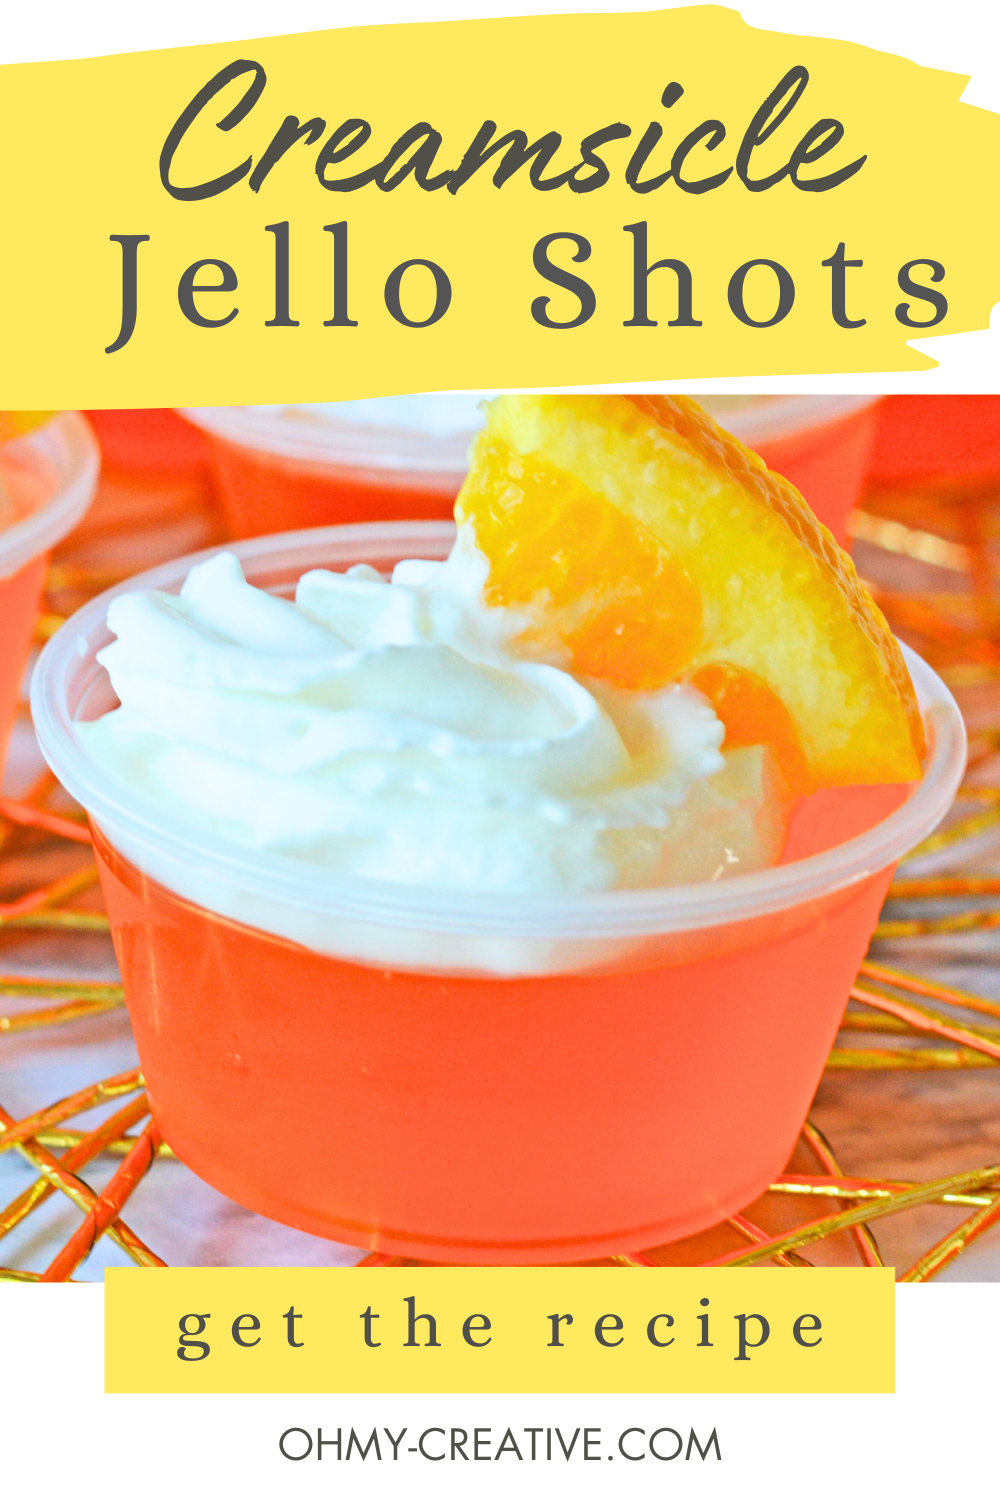 Pinterest image of a single creamsicle Jello shot with wiped cream and a slice of orange of for garnish.